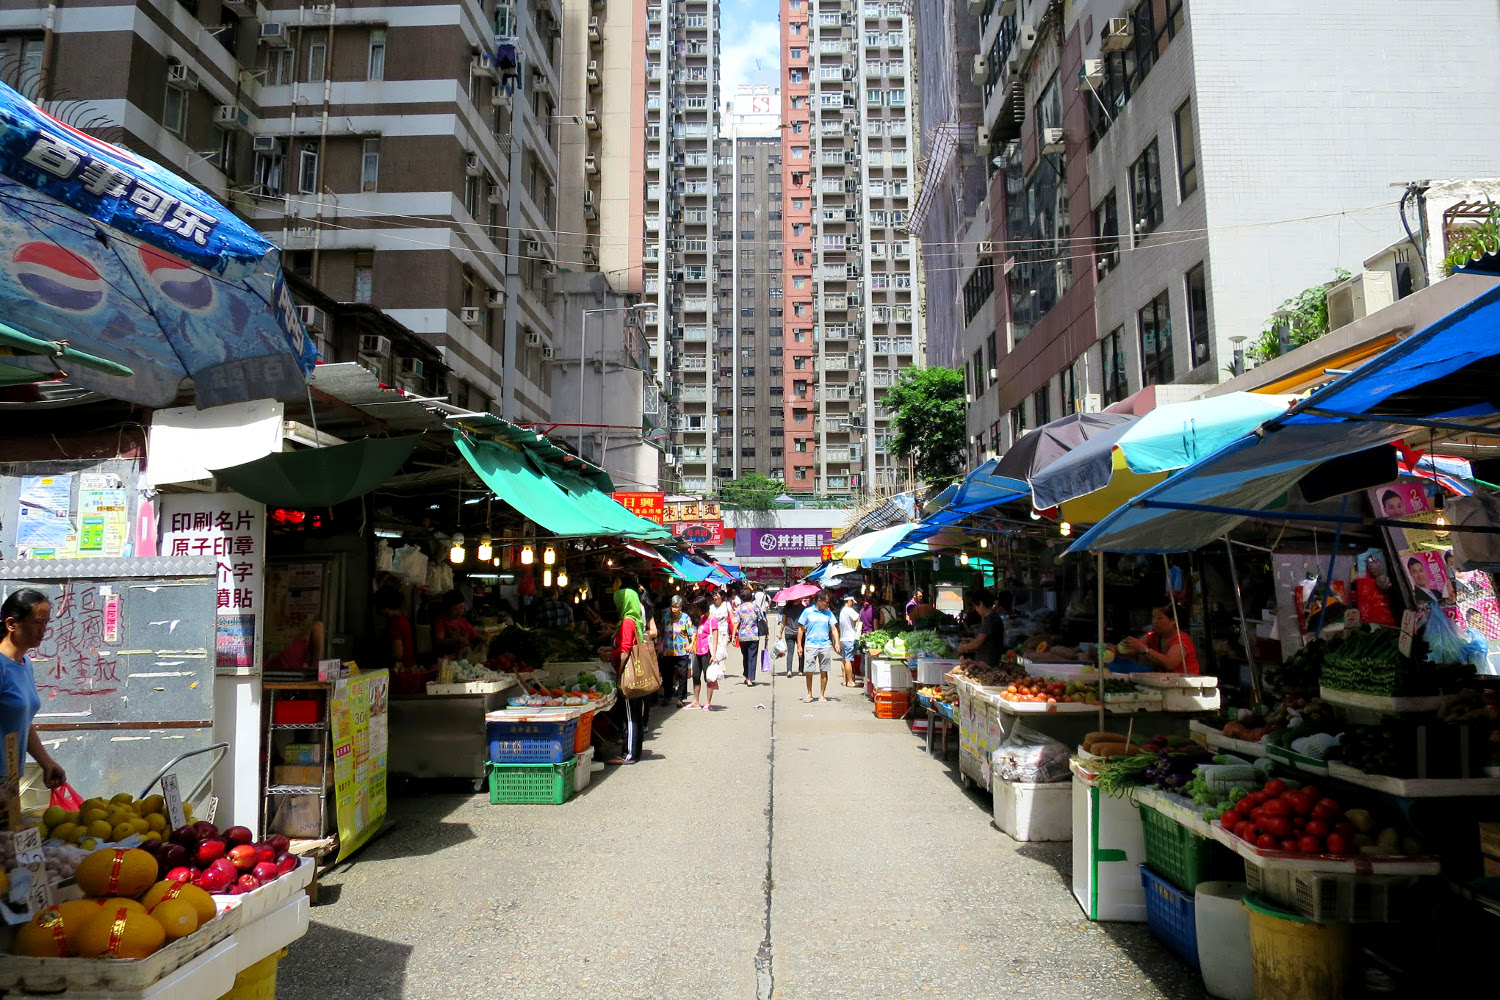 The markets of Mong Kong are perfect for browsing. Image by Megan Eaves / londoninfopage